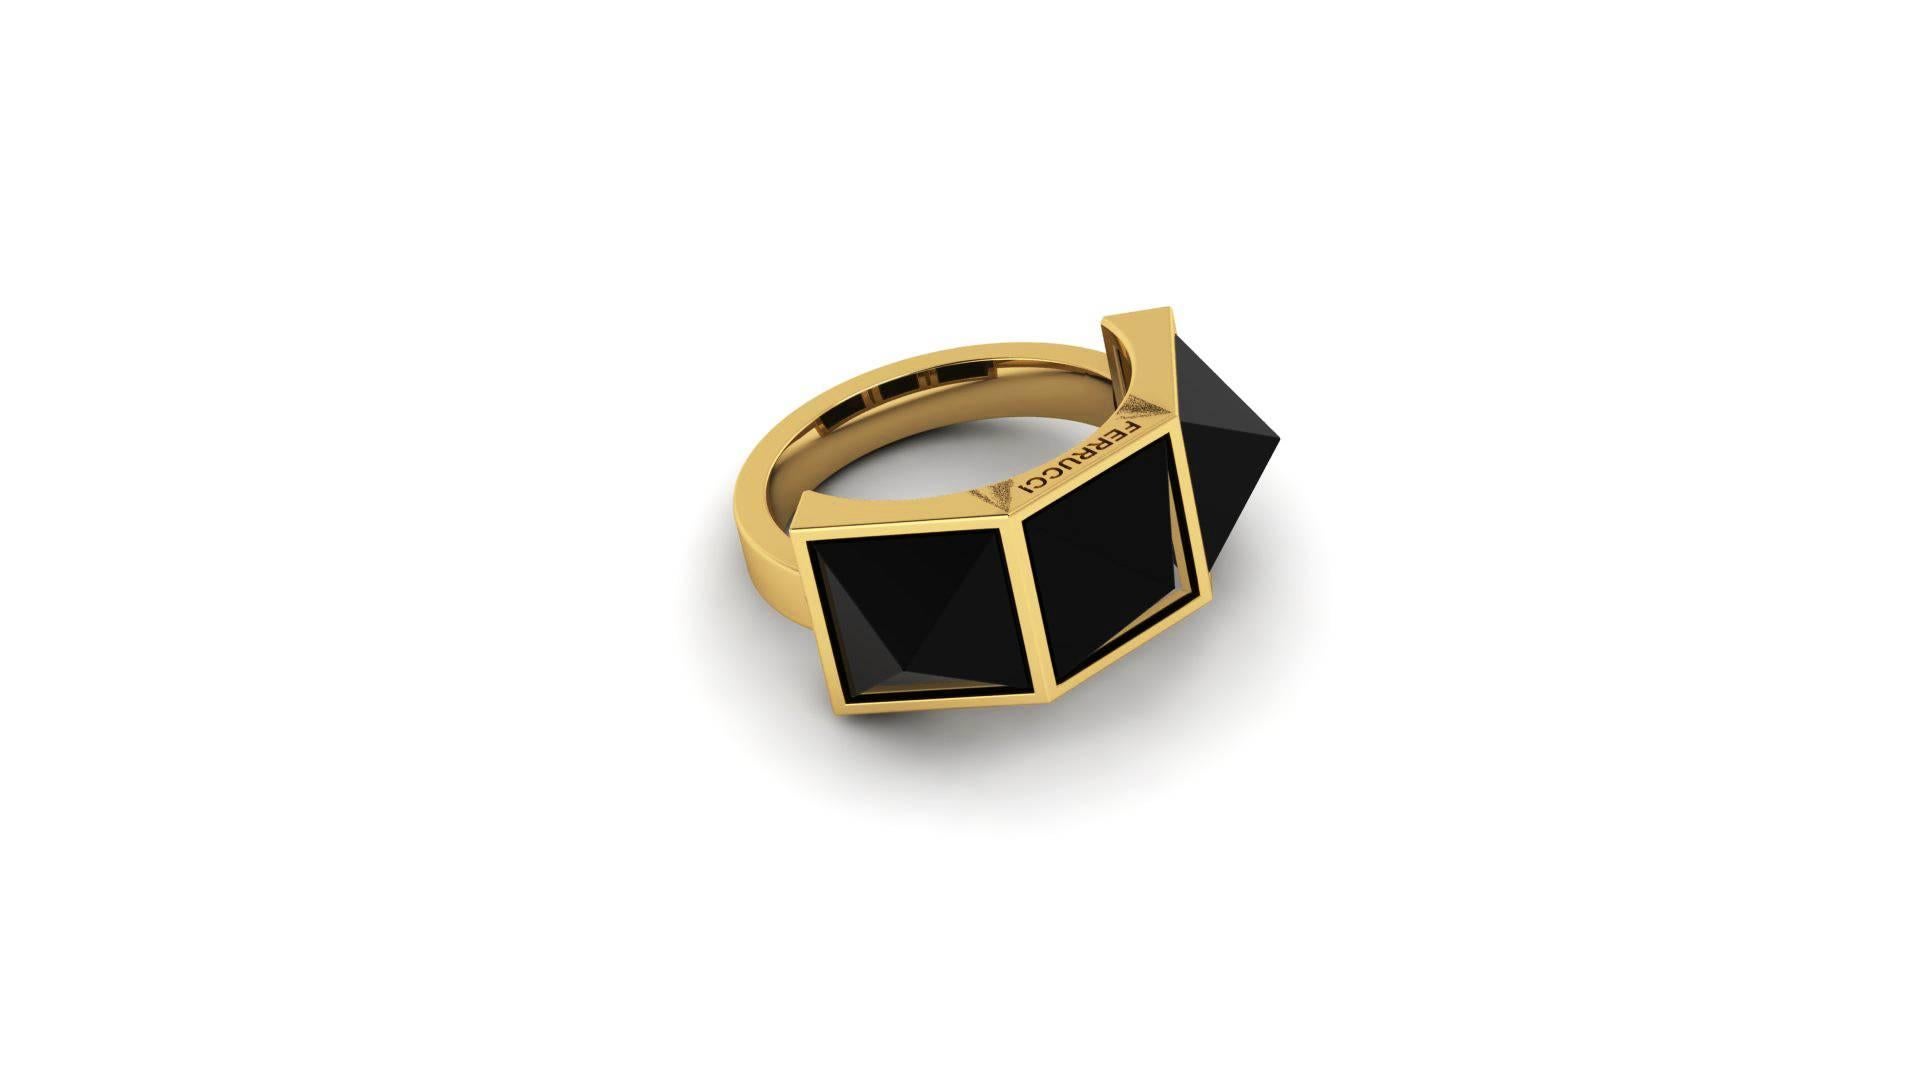 From FERRUCCI Pyramid collection, the Three Pyramid Black Onyx ring in 18k yellow gold, manufactured in New York.

Onyx is believed to offer personal protection and relationship harmony and The Pyramid symbolizes bigger consciousness of strength and